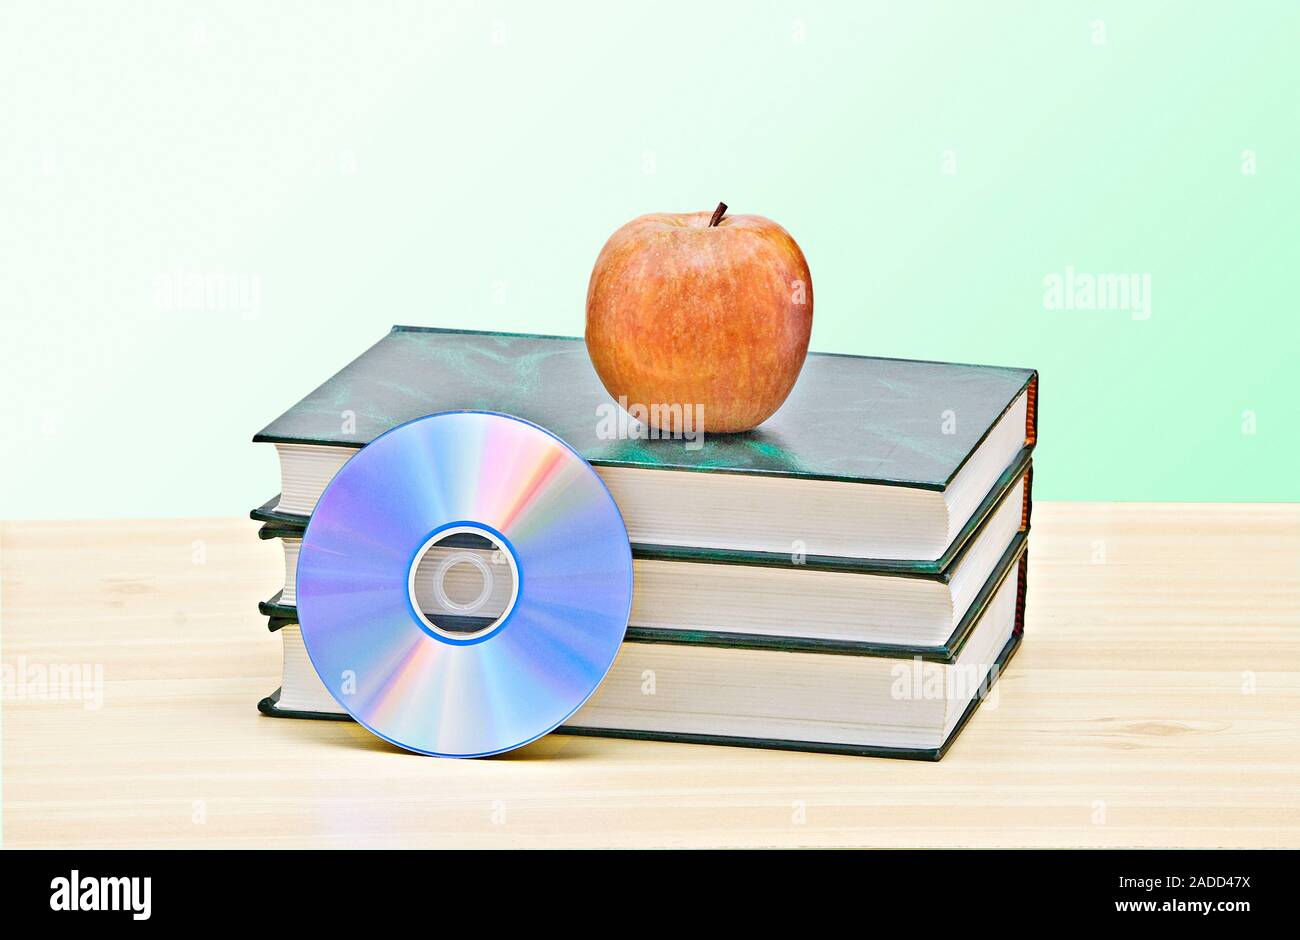 Apple, dvd, and books as a symbol of transition from old to new ways of learning Stock Photo